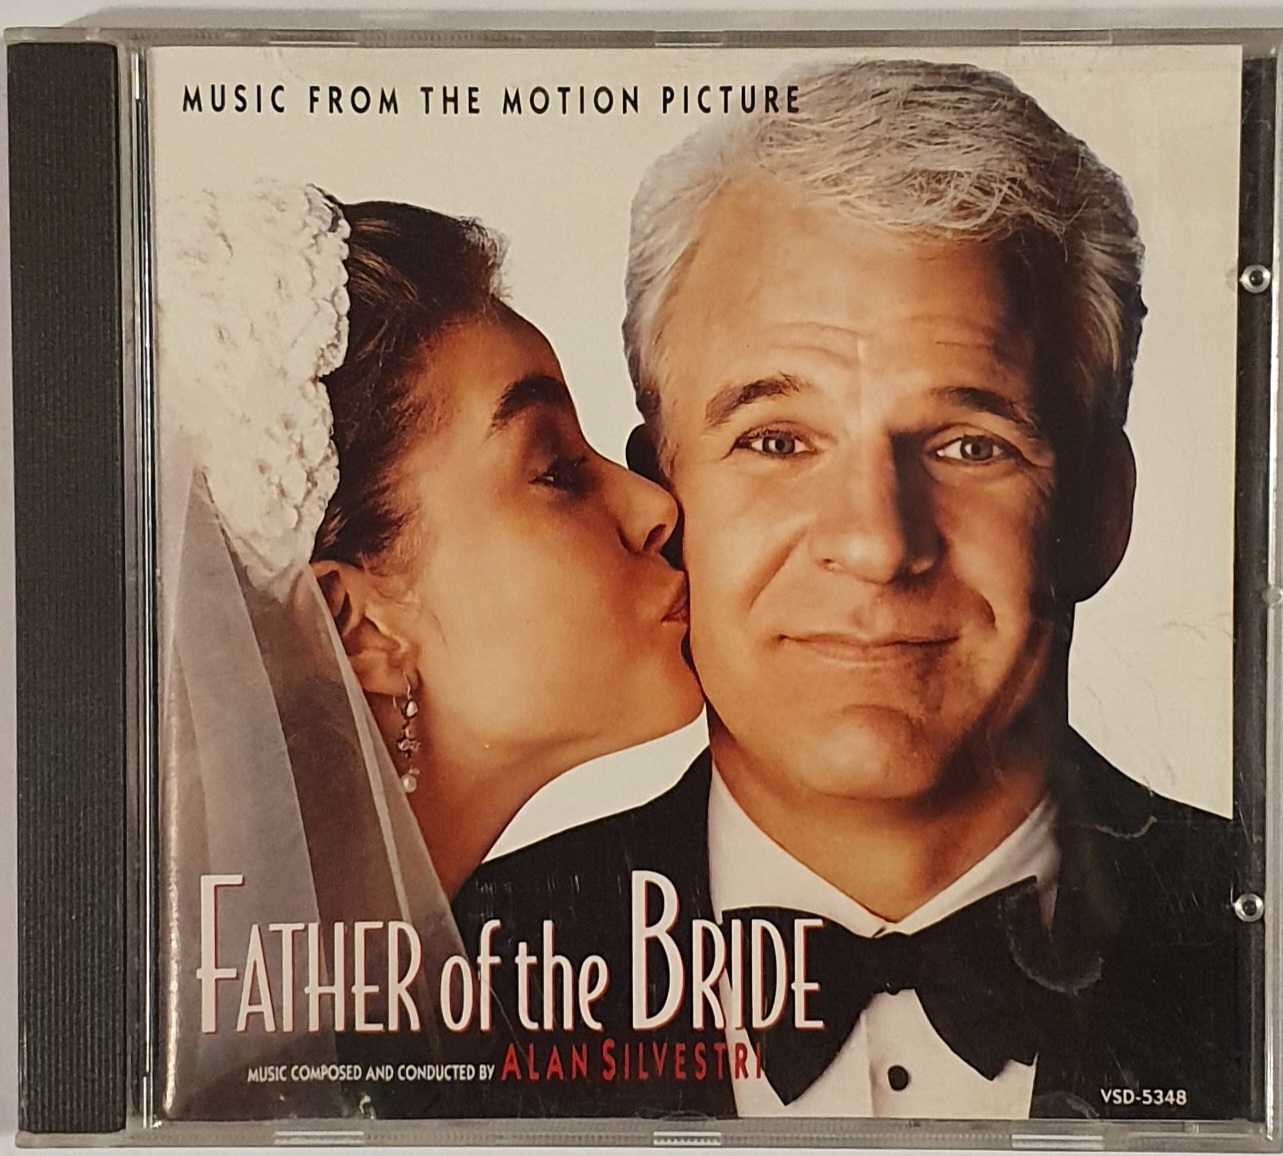 CD, Soundtrack, Alan Silvestri, Father Of The Bride - Music From The Motion Picture